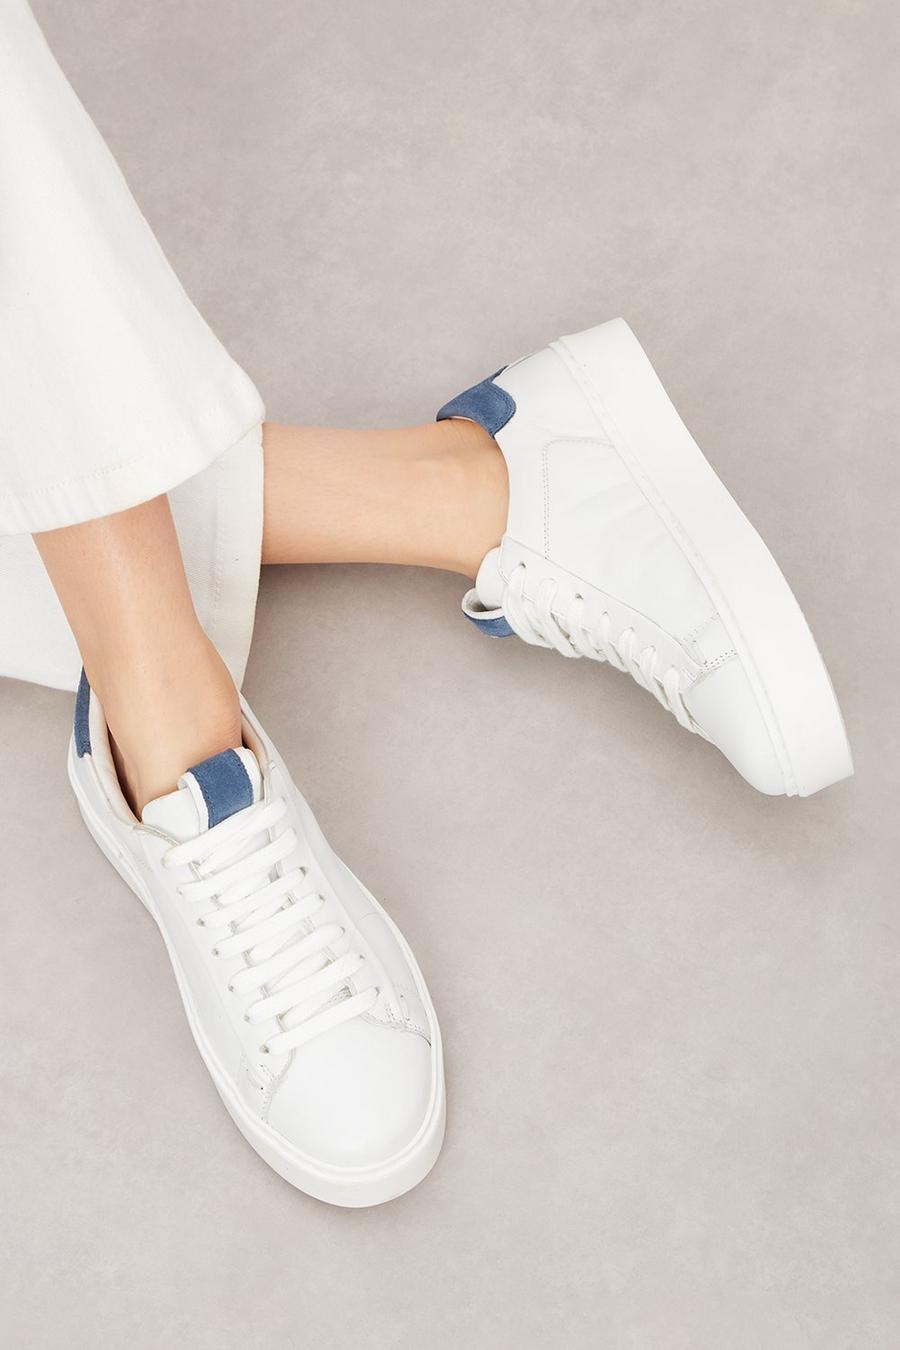 Principles: Nicola Chunky Sole Clean Leather Trainer